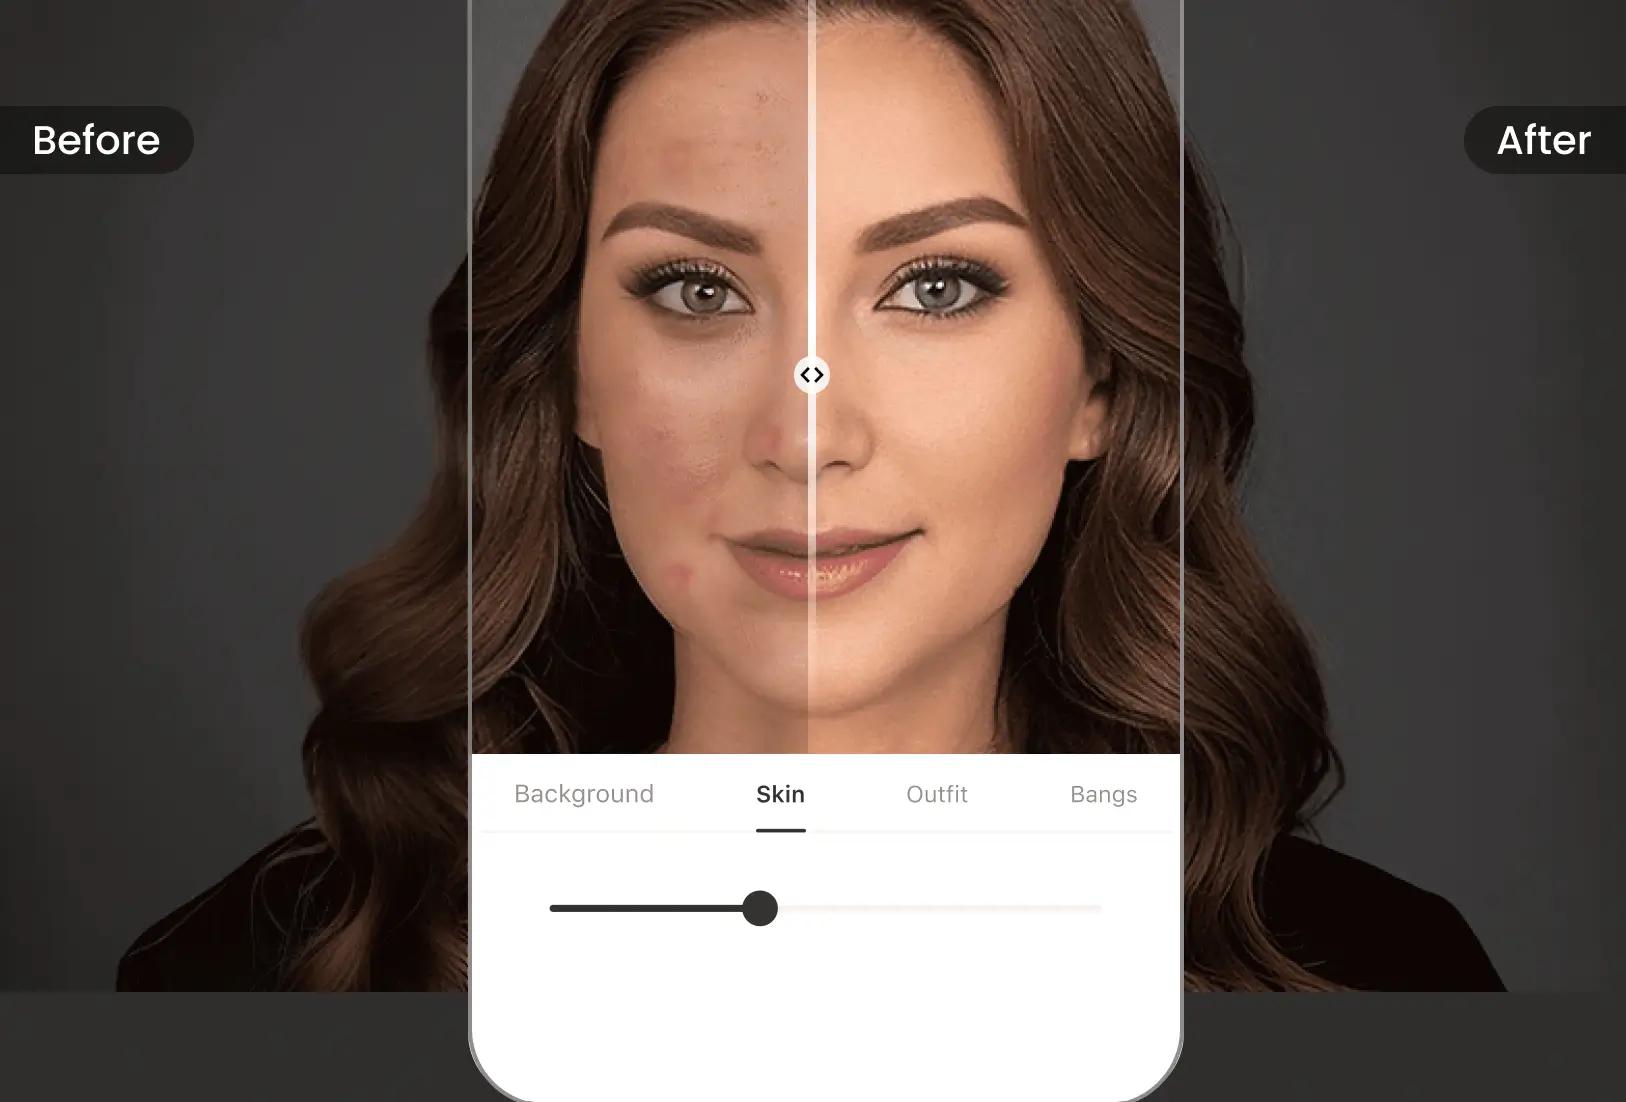 Achieve a natural yet refined look in your ID photo with our app's specialized beauty effects.